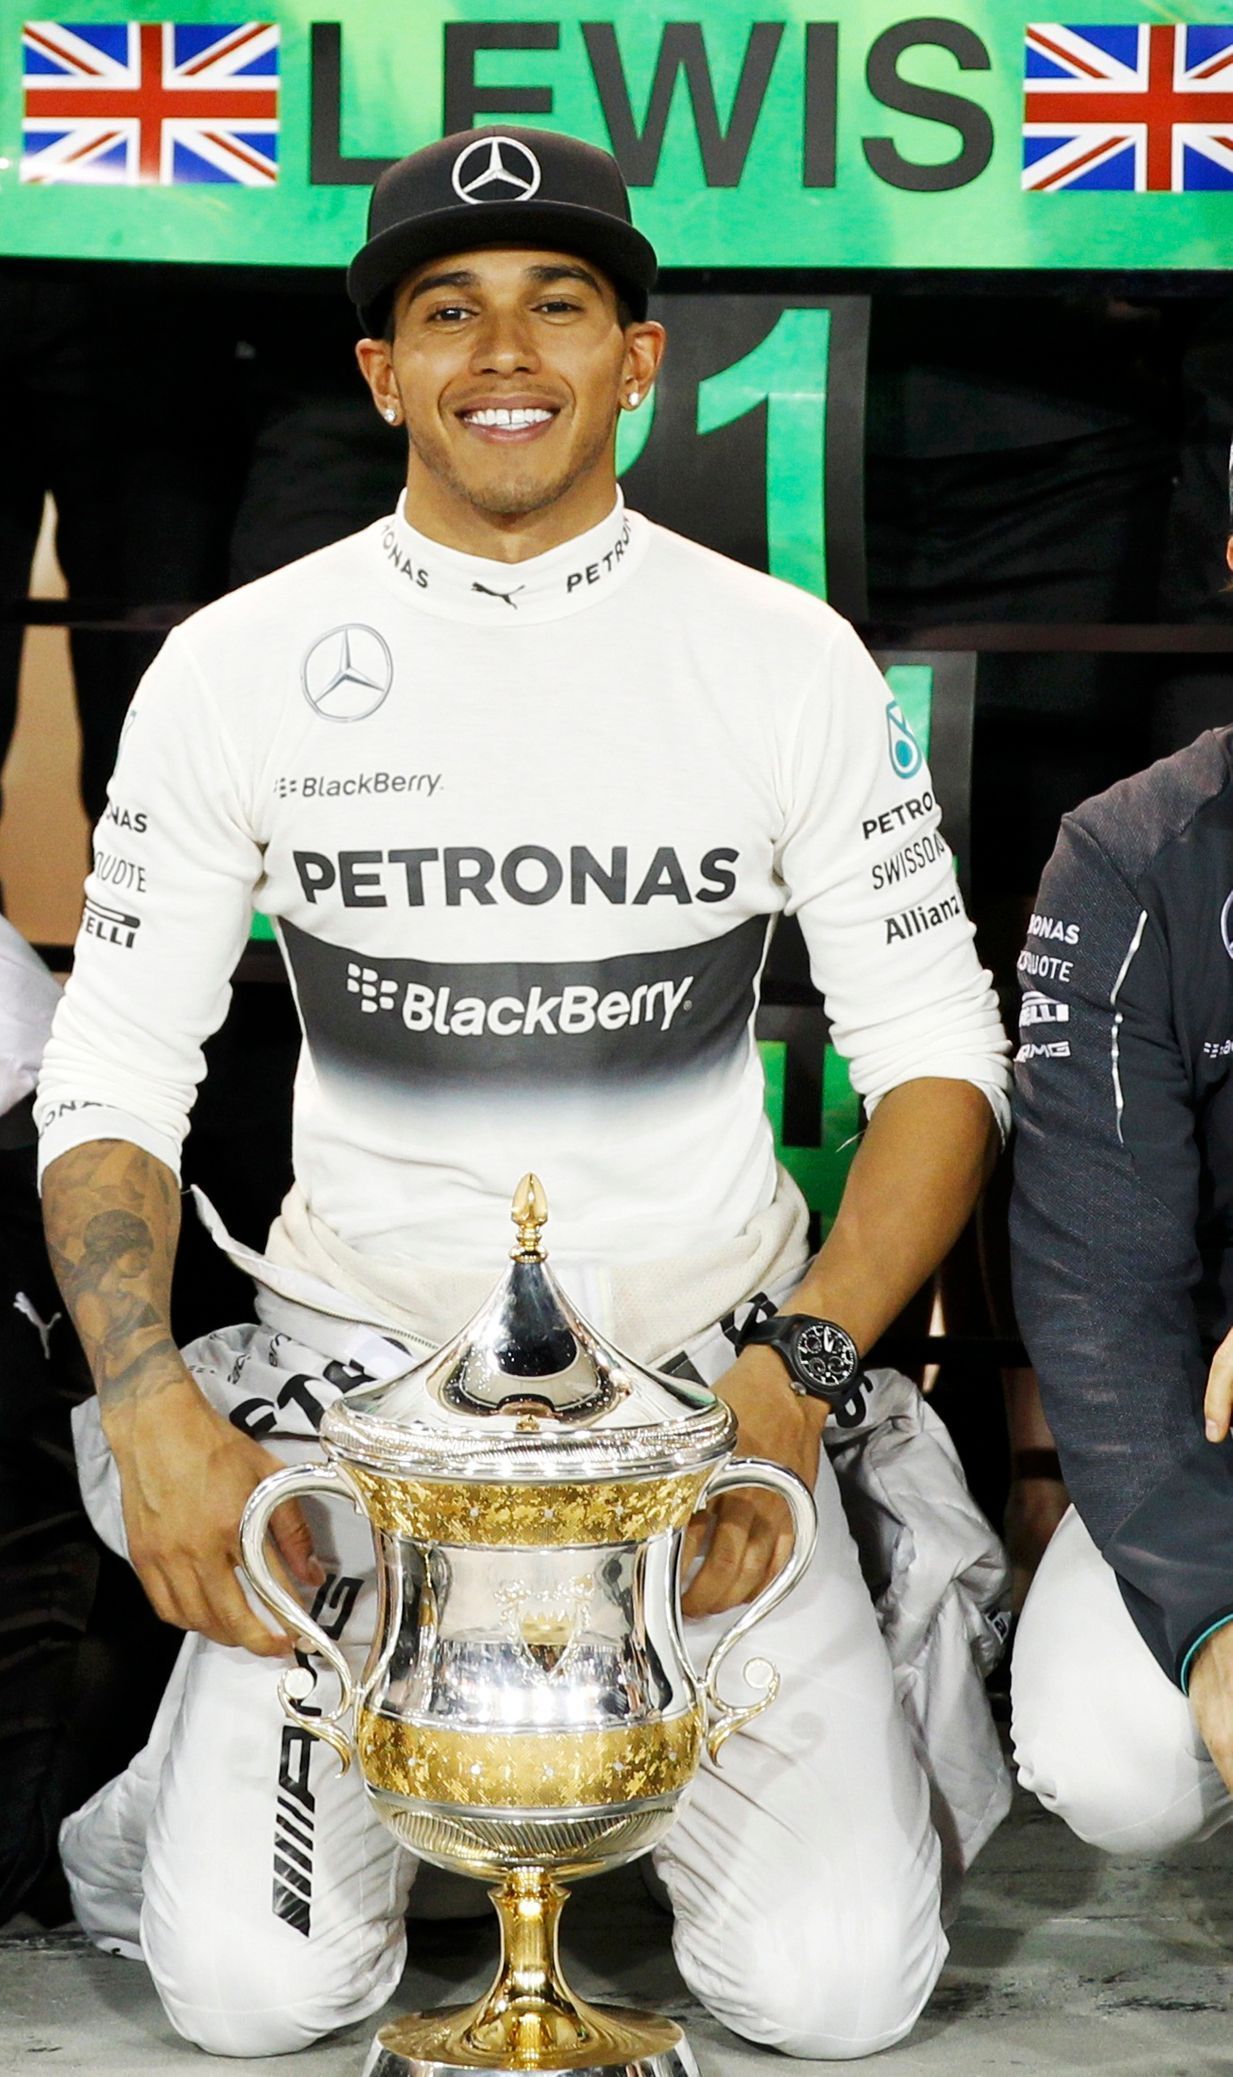 Mercedes Formula One driver Lewis Hamilton of Britain poses for pictures after winning the Bahrain F1 Grand Prix at the Bahrain International Circuit (BIC) in Sakhir